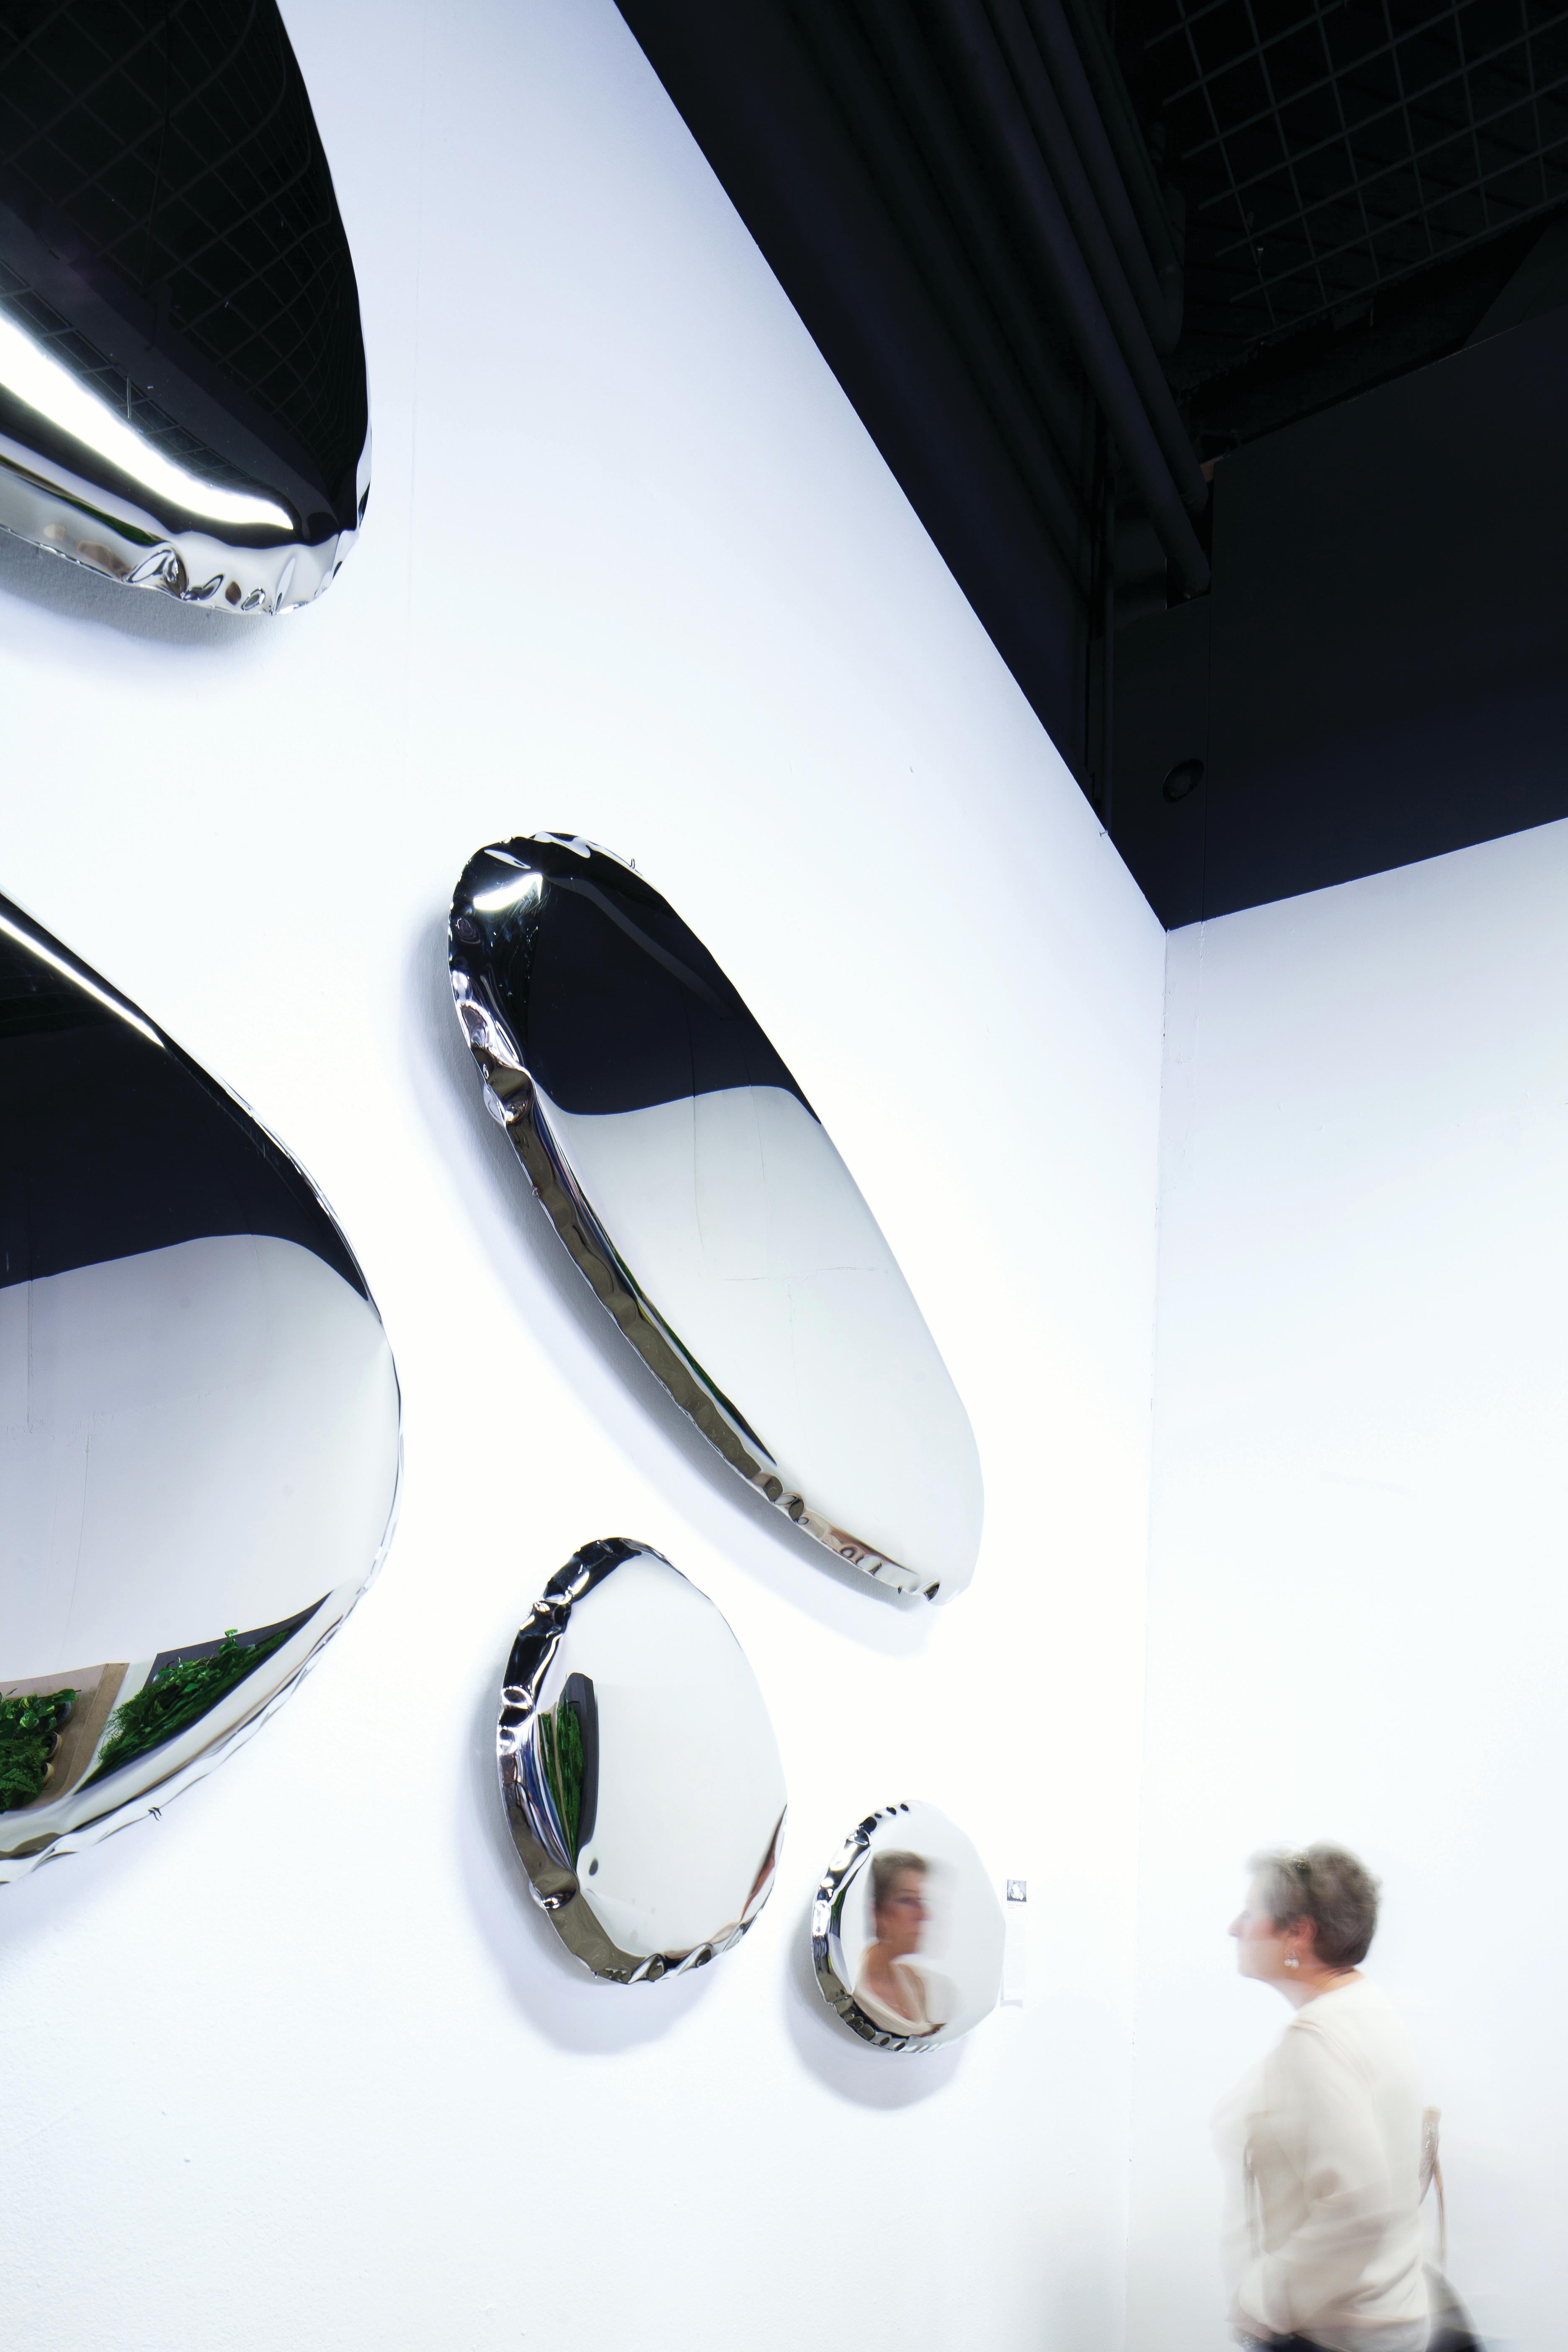 Tafla 06, sculptural wall mirror, Zieta

Title: Tafla 06

Material: Polished stainless steel

Measures: 
H 23.63 in. x W 19.69 in. x D 2.37 in.
H 60 cm x W 50 cm x D 6 cm

Tafla O series is characterized by smooth, optically light shapes